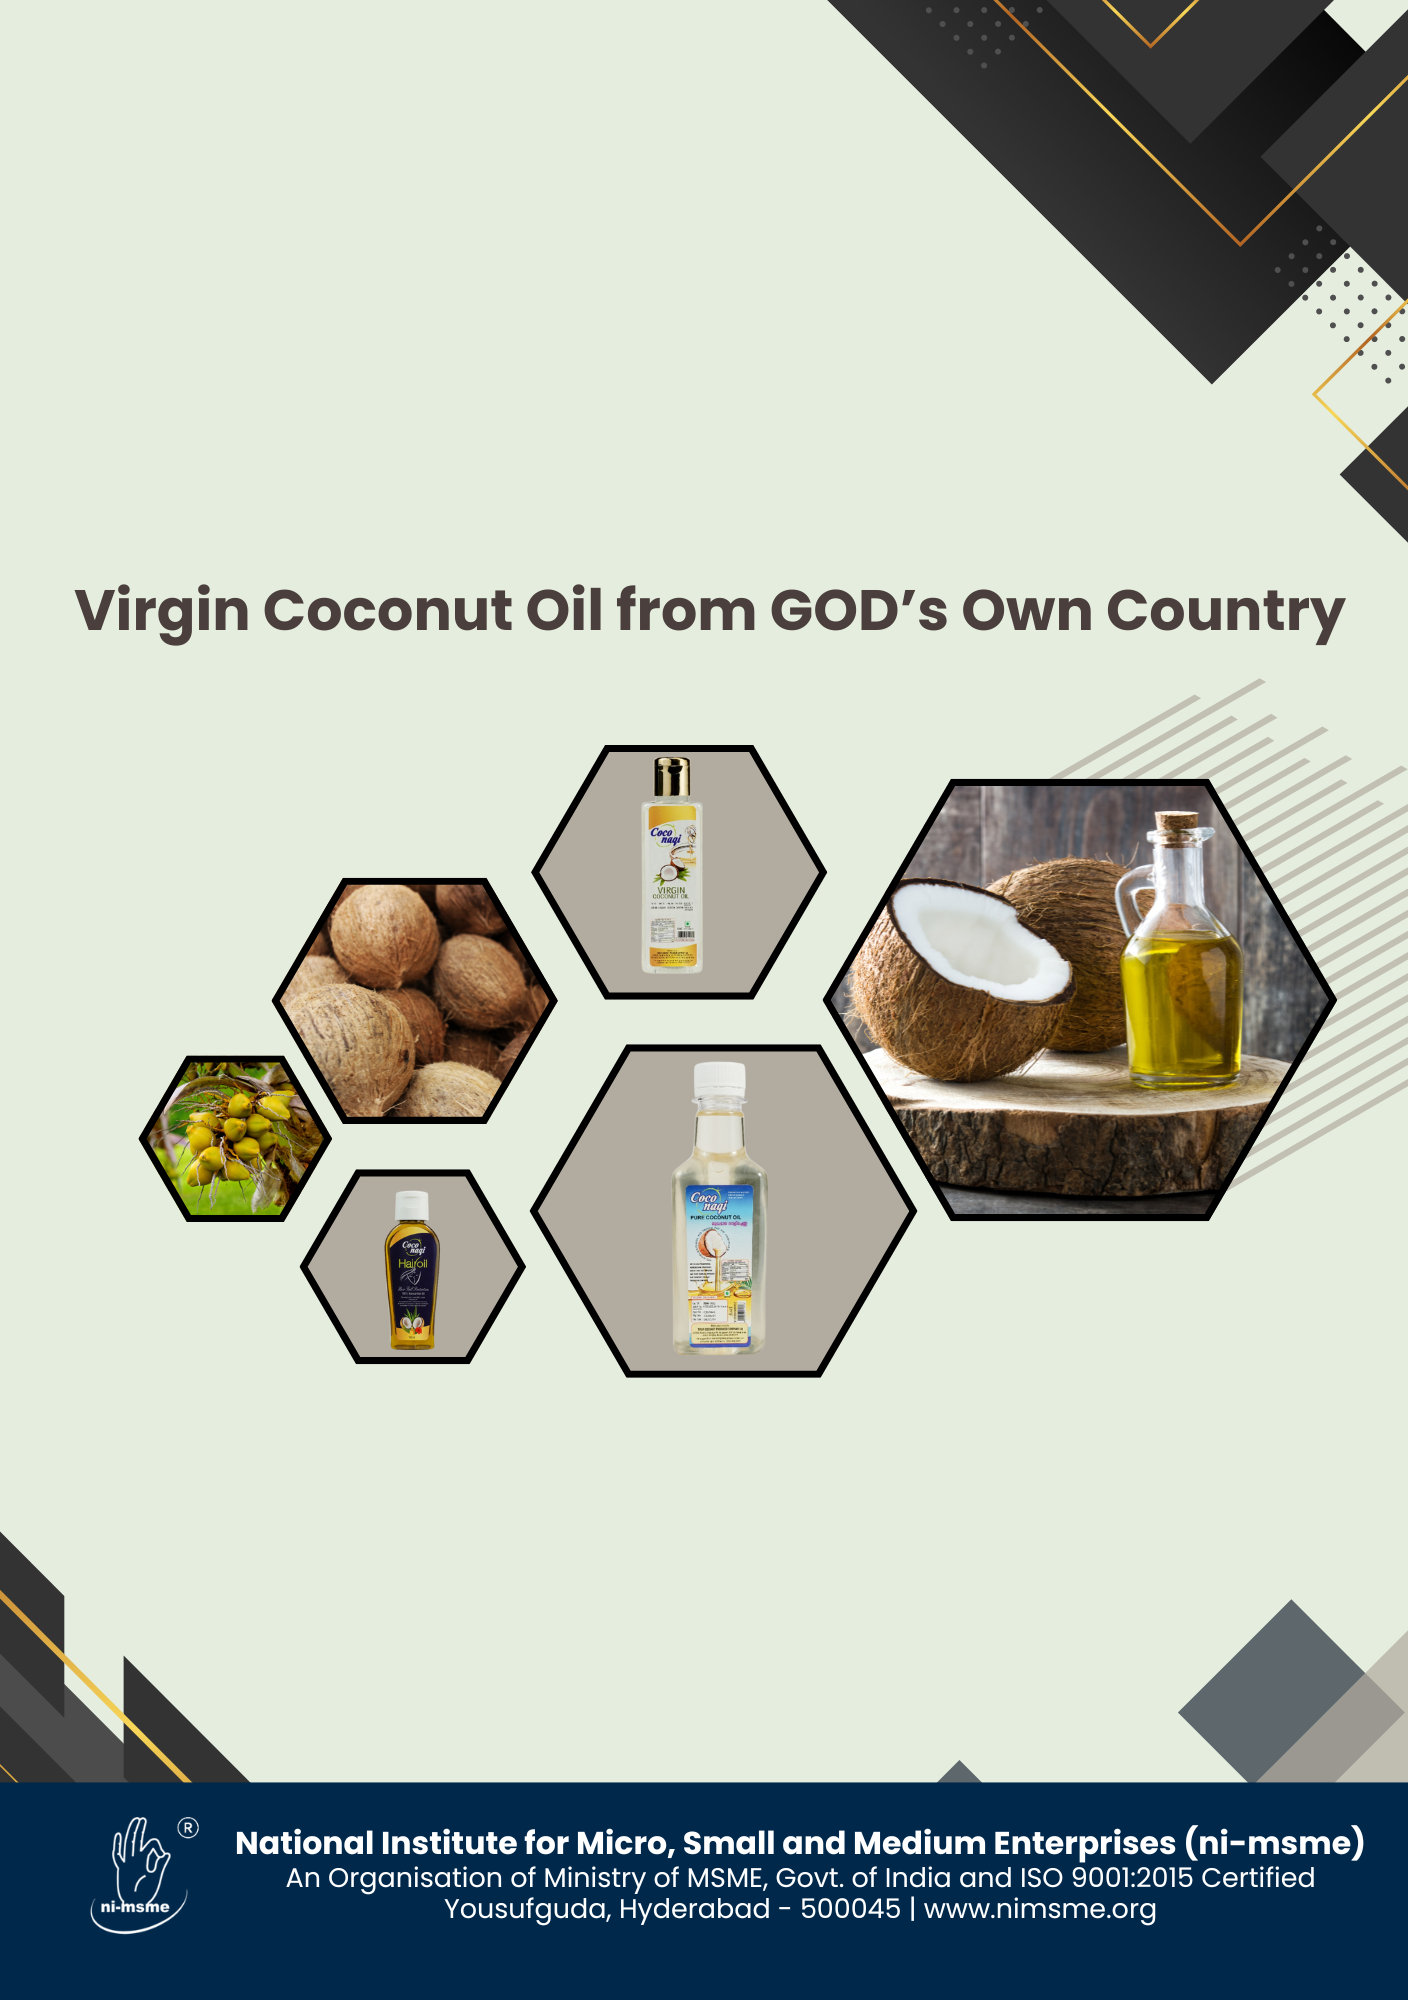  Virgin Coconut Oil from GOD’s Own Country